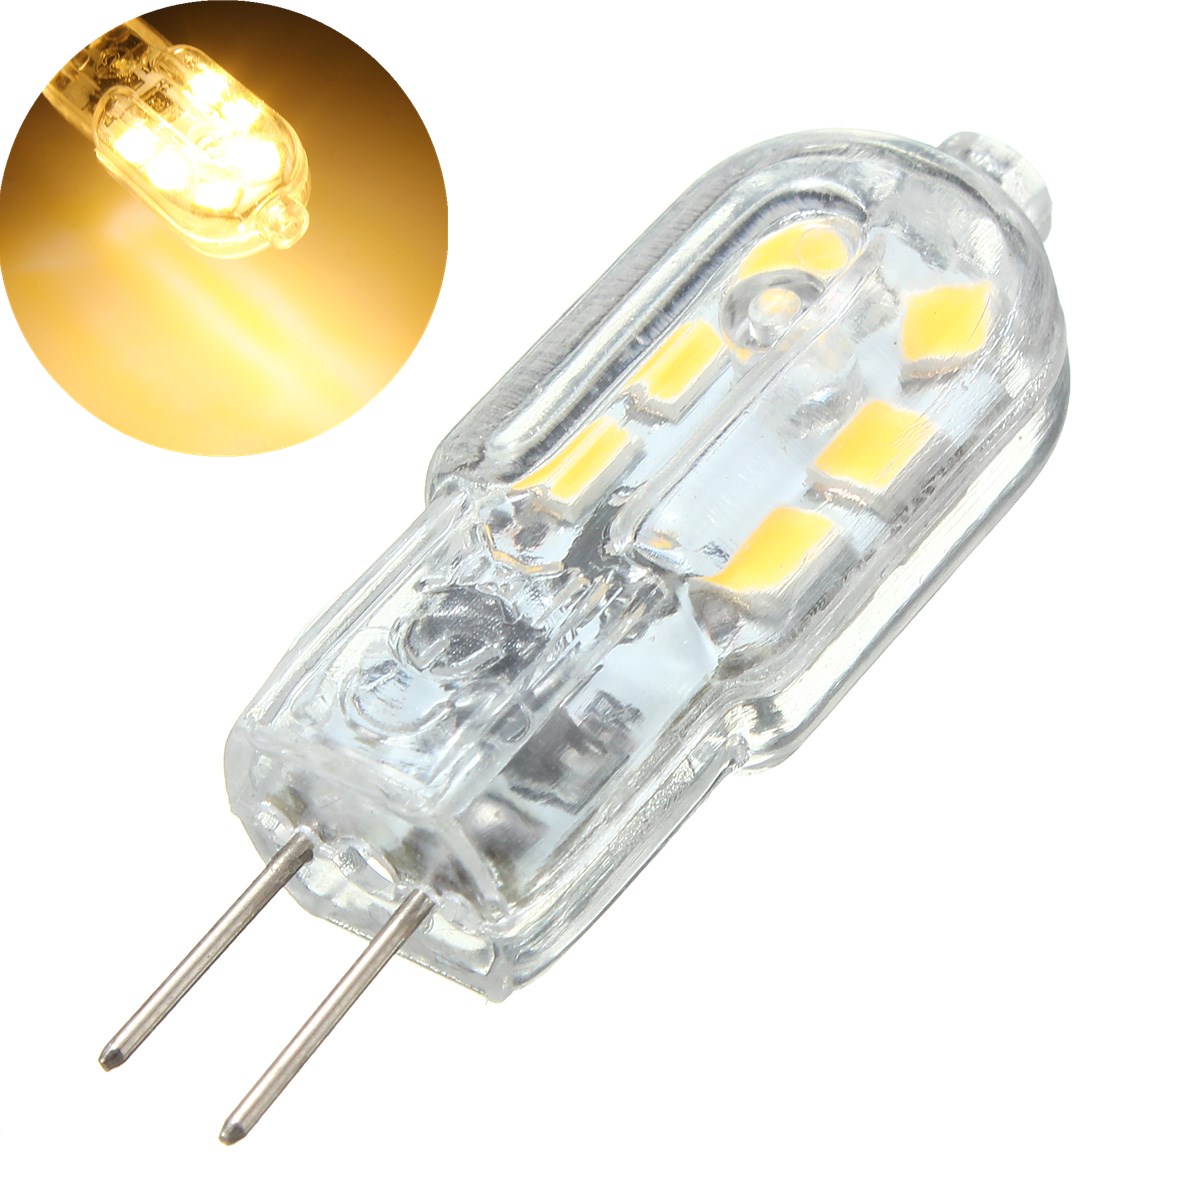 

5PCS G4 2W Non-dimmable 2835 Warm White Transparent Cover LED Light Bulb for Indoor Home Decor DC12V